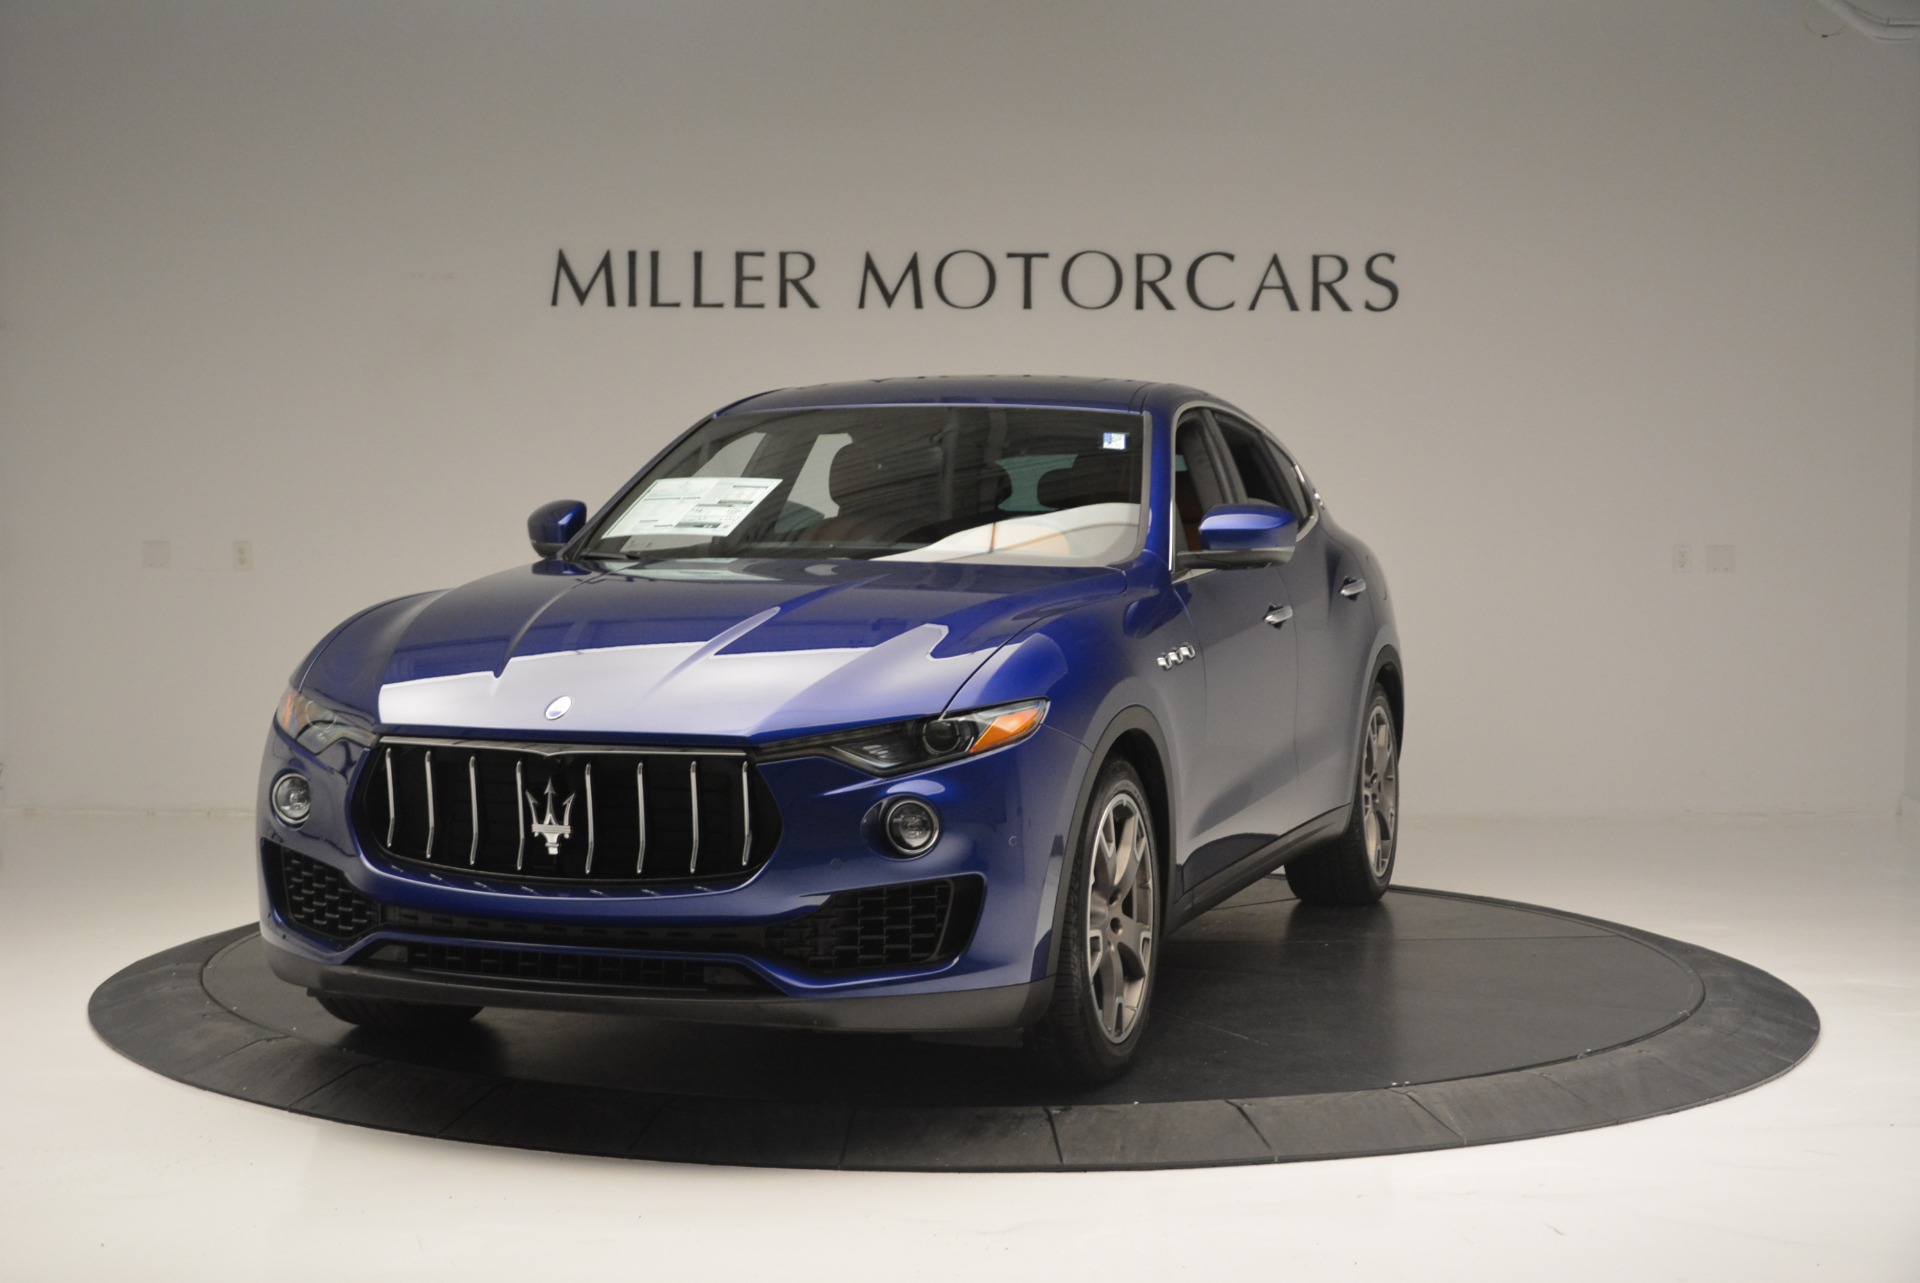 Used 2018 Maserati Levante Q4 for sale Sold at Pagani of Greenwich in Greenwich CT 06830 1